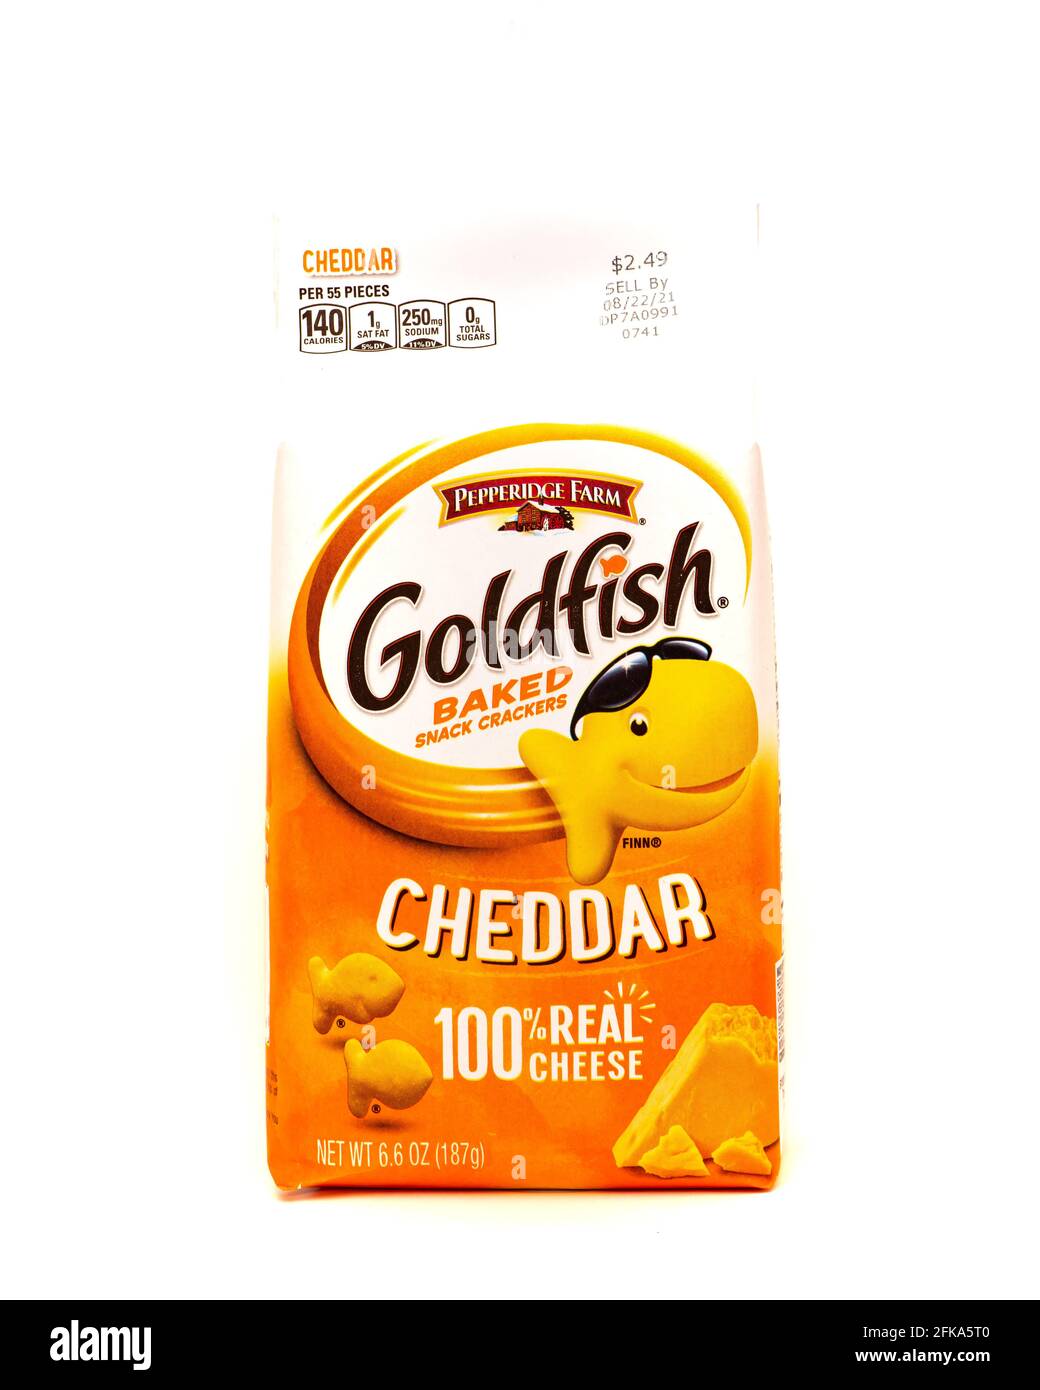 A bag of Pepperidge Farm Goldfish, a cheddar cheese baked snack cracker made with real cheese, Stock Photo